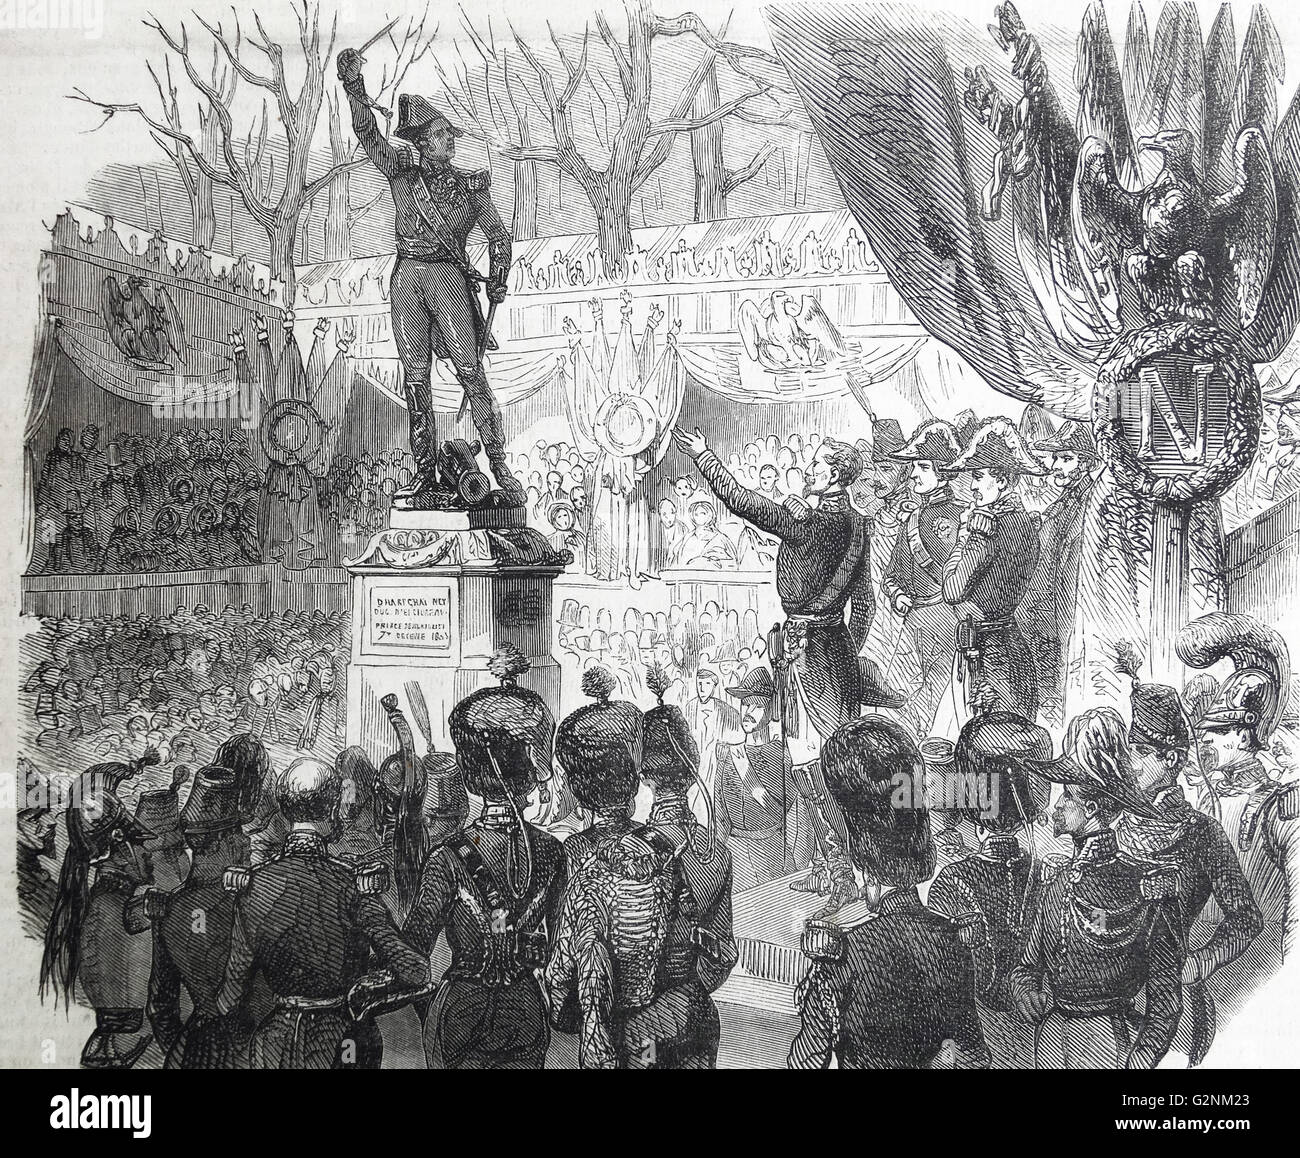 1853, Paris: unveiling of a statue to Michel Ney (1769 – 1815). Marshal Ney, was a French soldier and military commander during the French Revolutionary Wars and the Napoleonic Wars Stock Photo